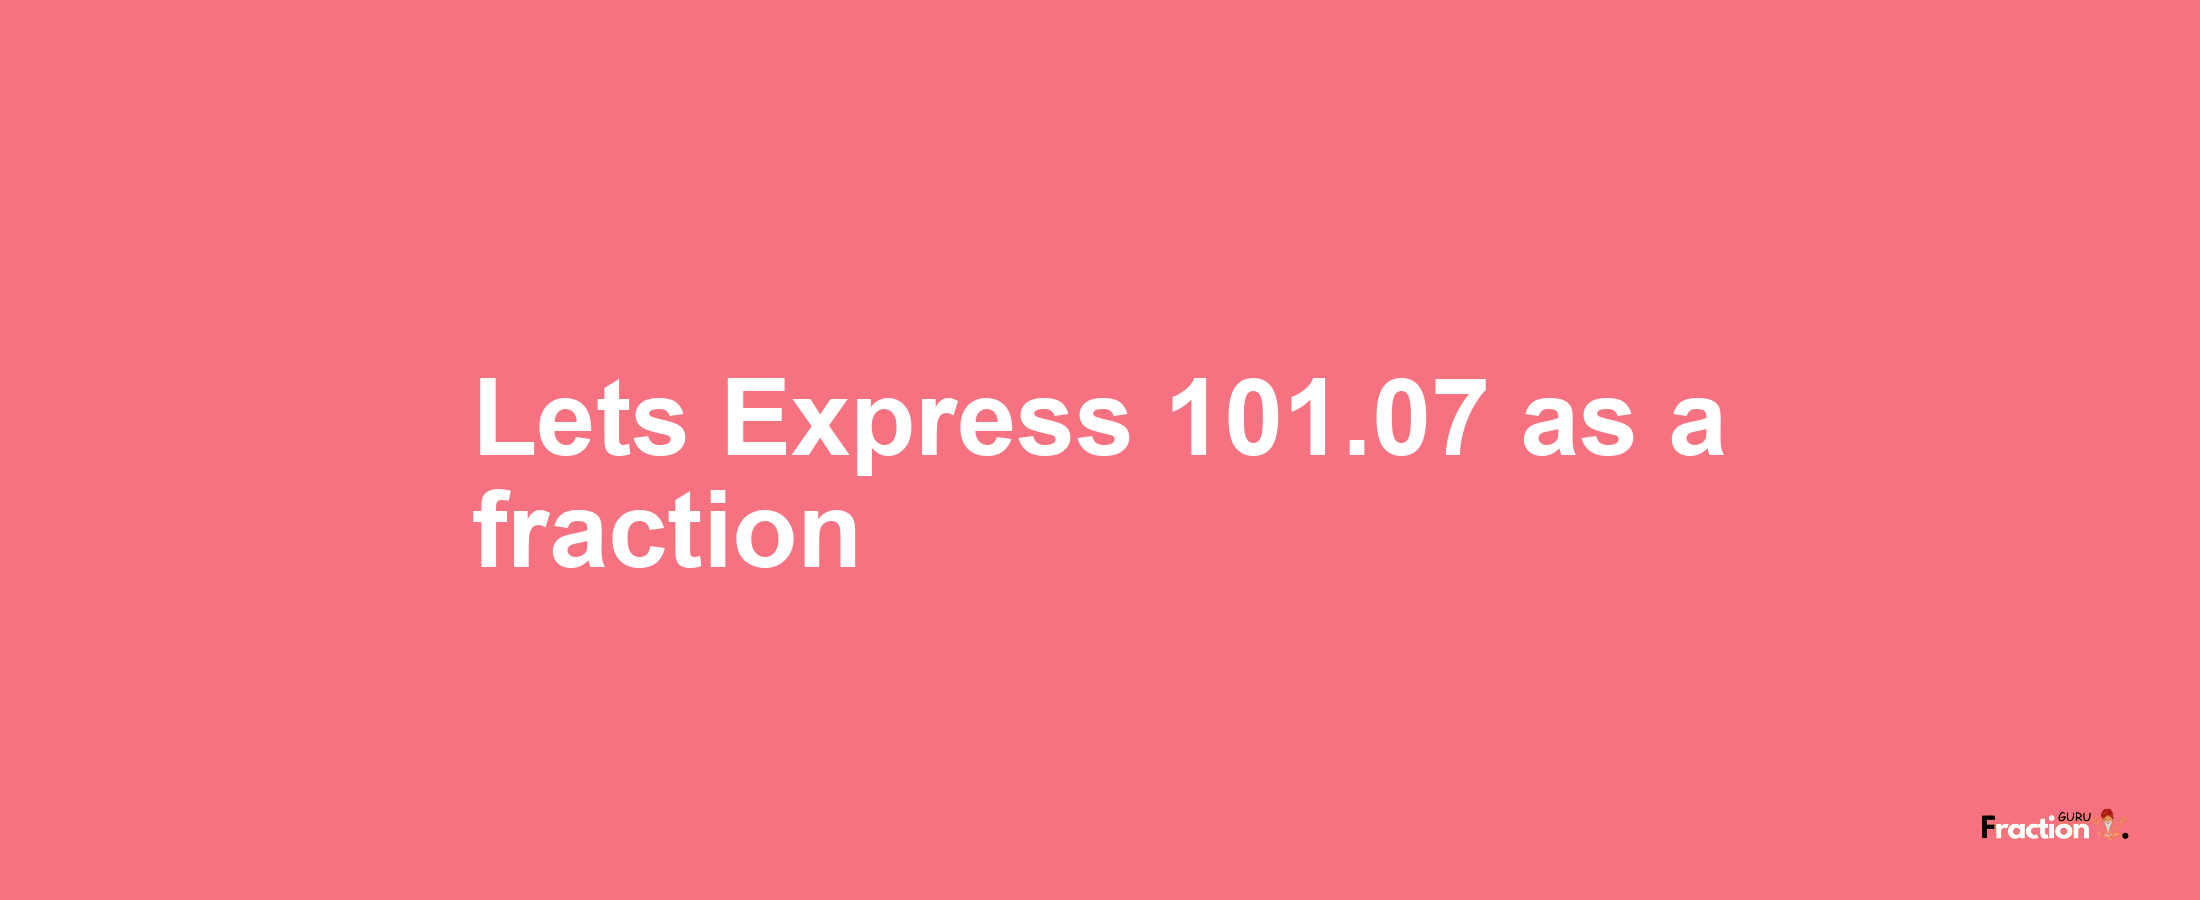 Lets Express 101.07 as afraction